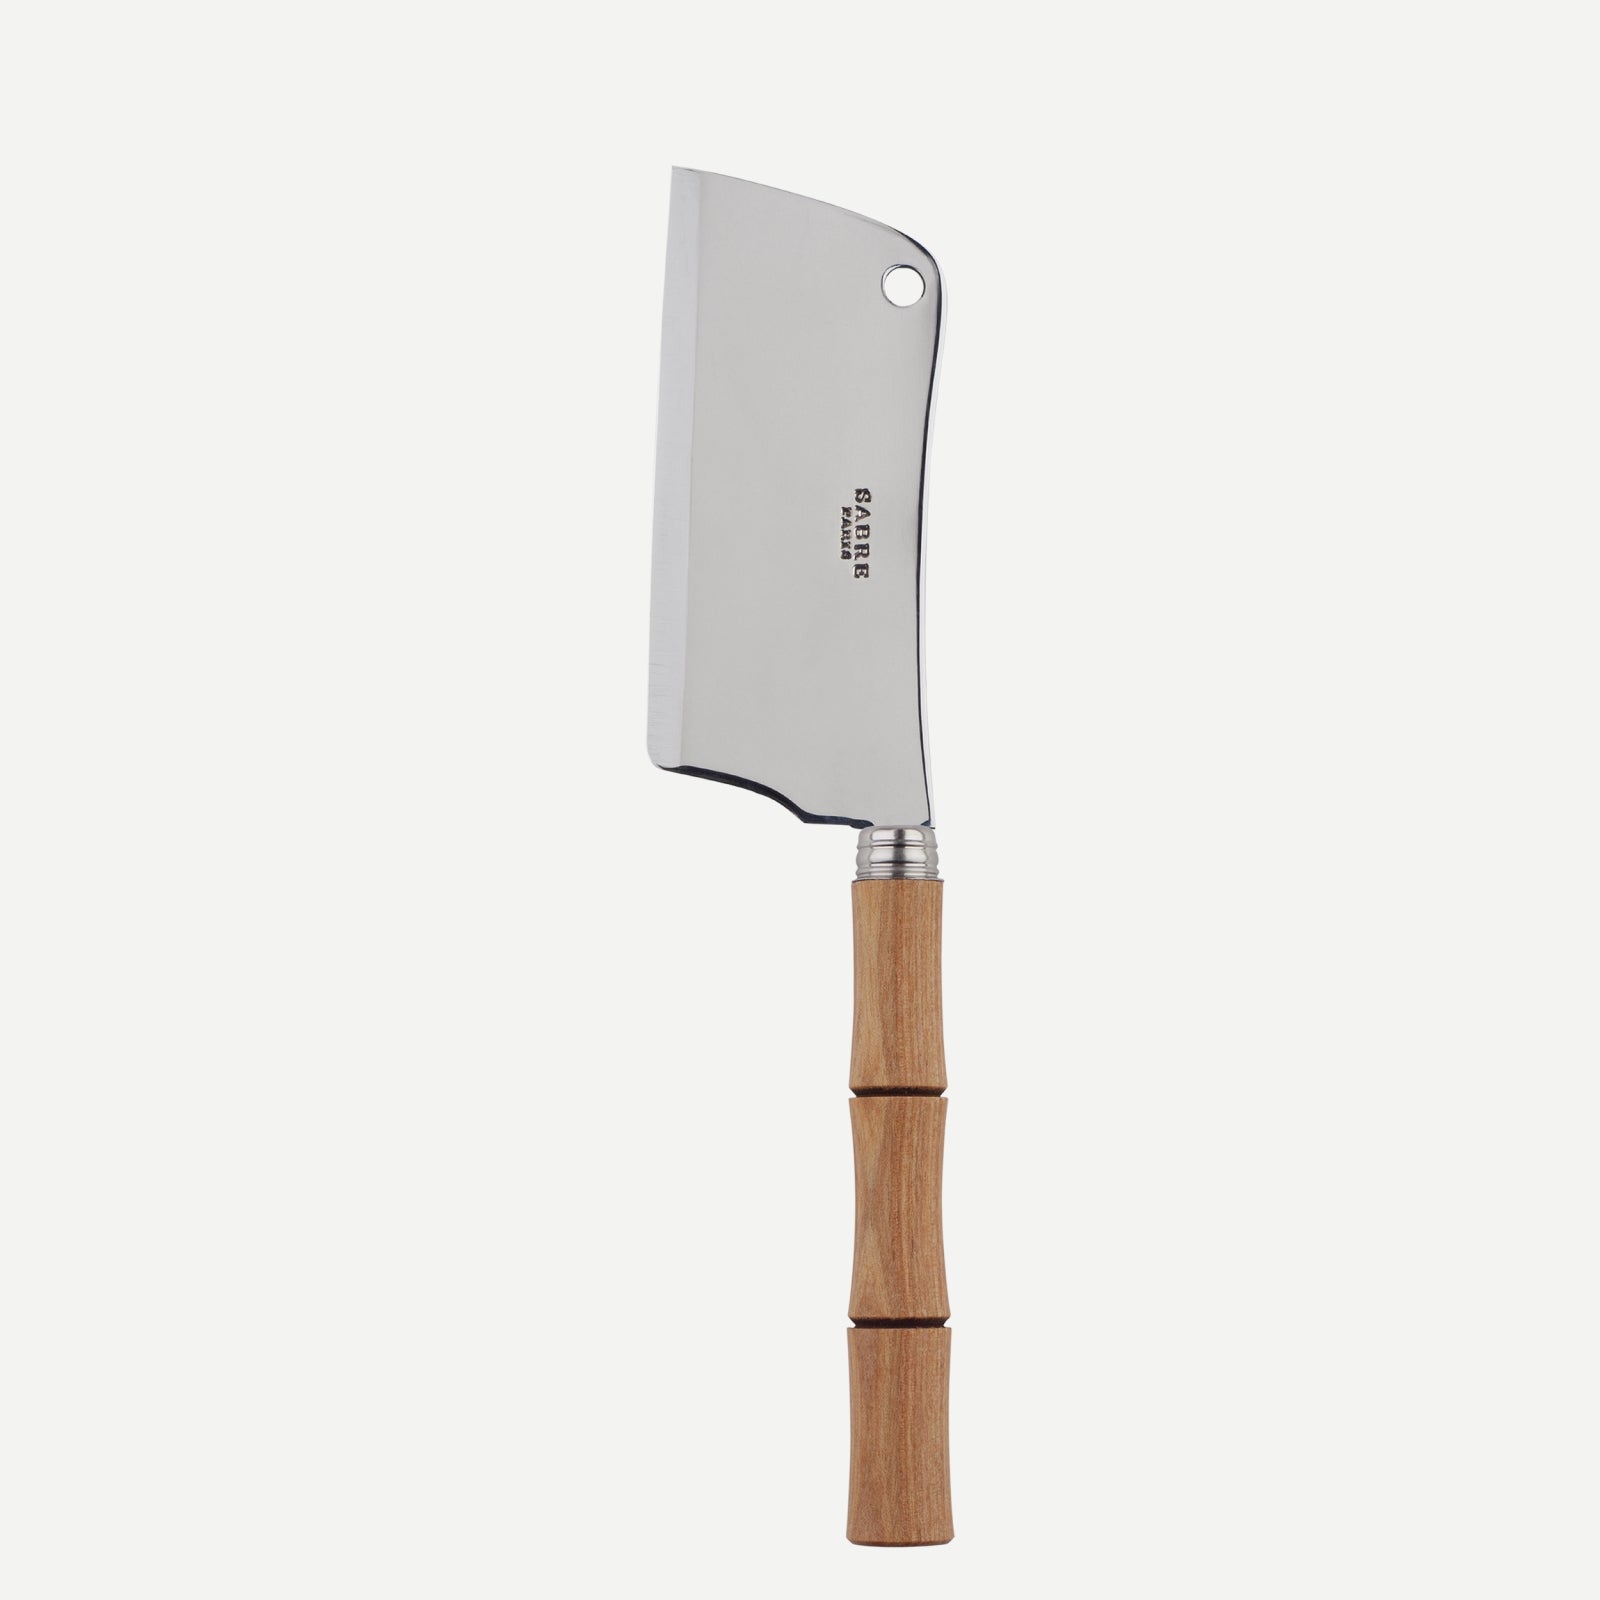 Cheese cleaver - Bamboo - Light press wood